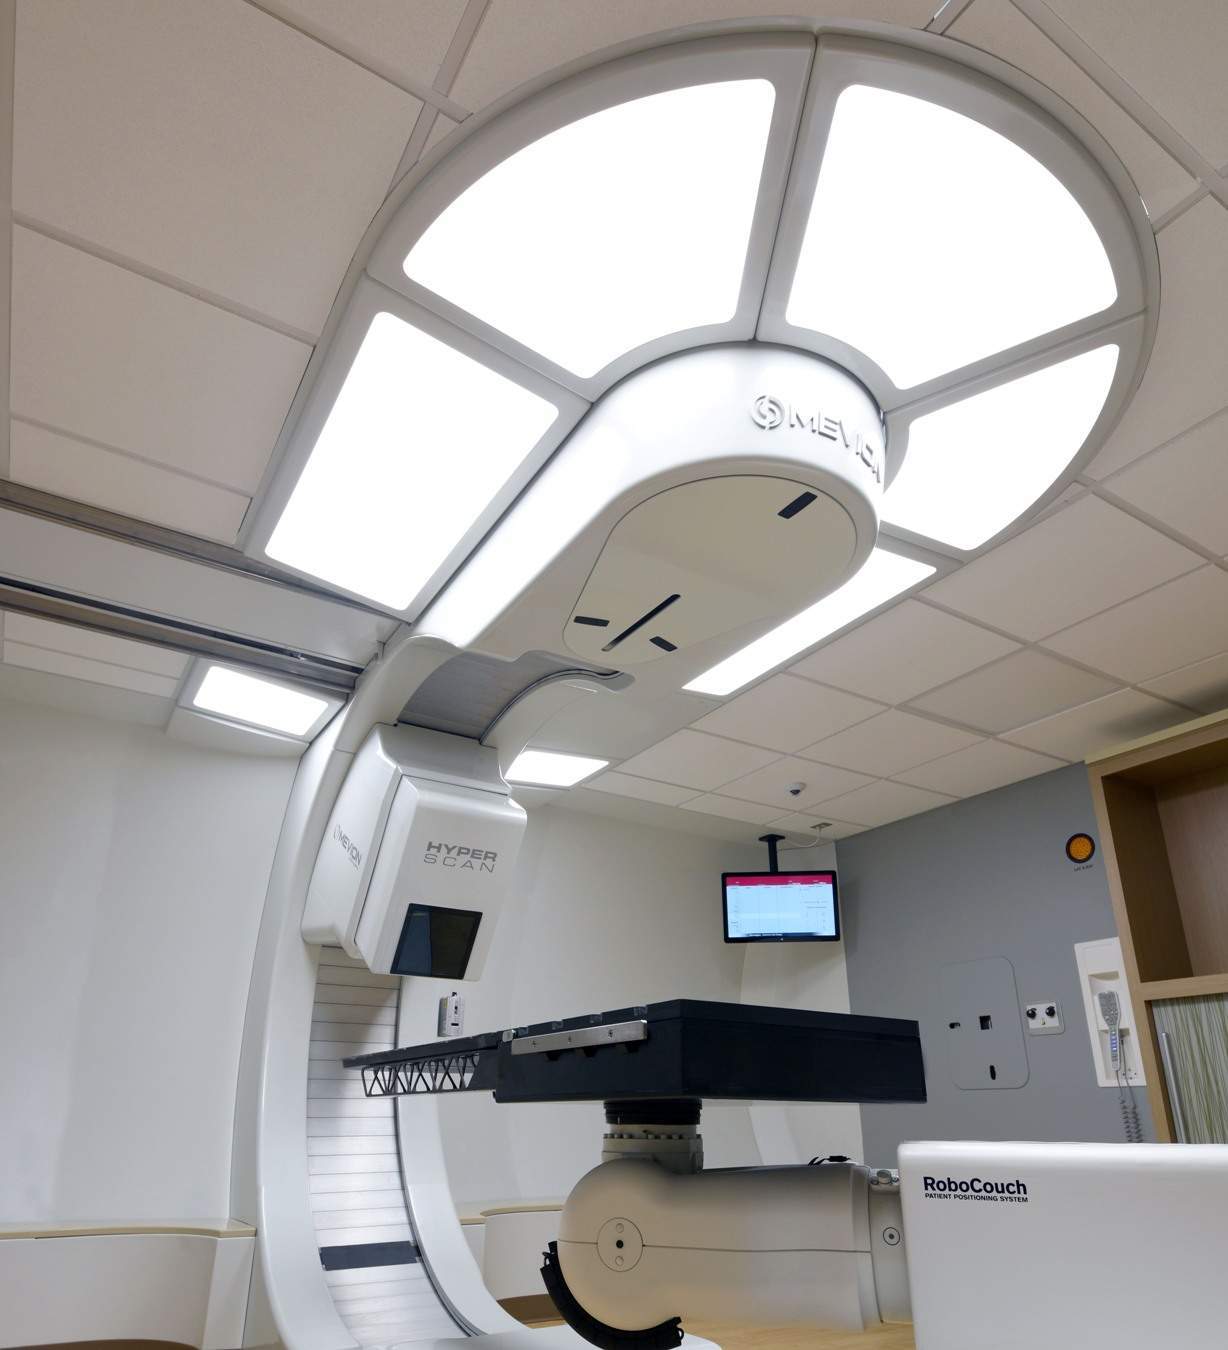 HCI at University of Utah selects Mevion S250i proton therapy system